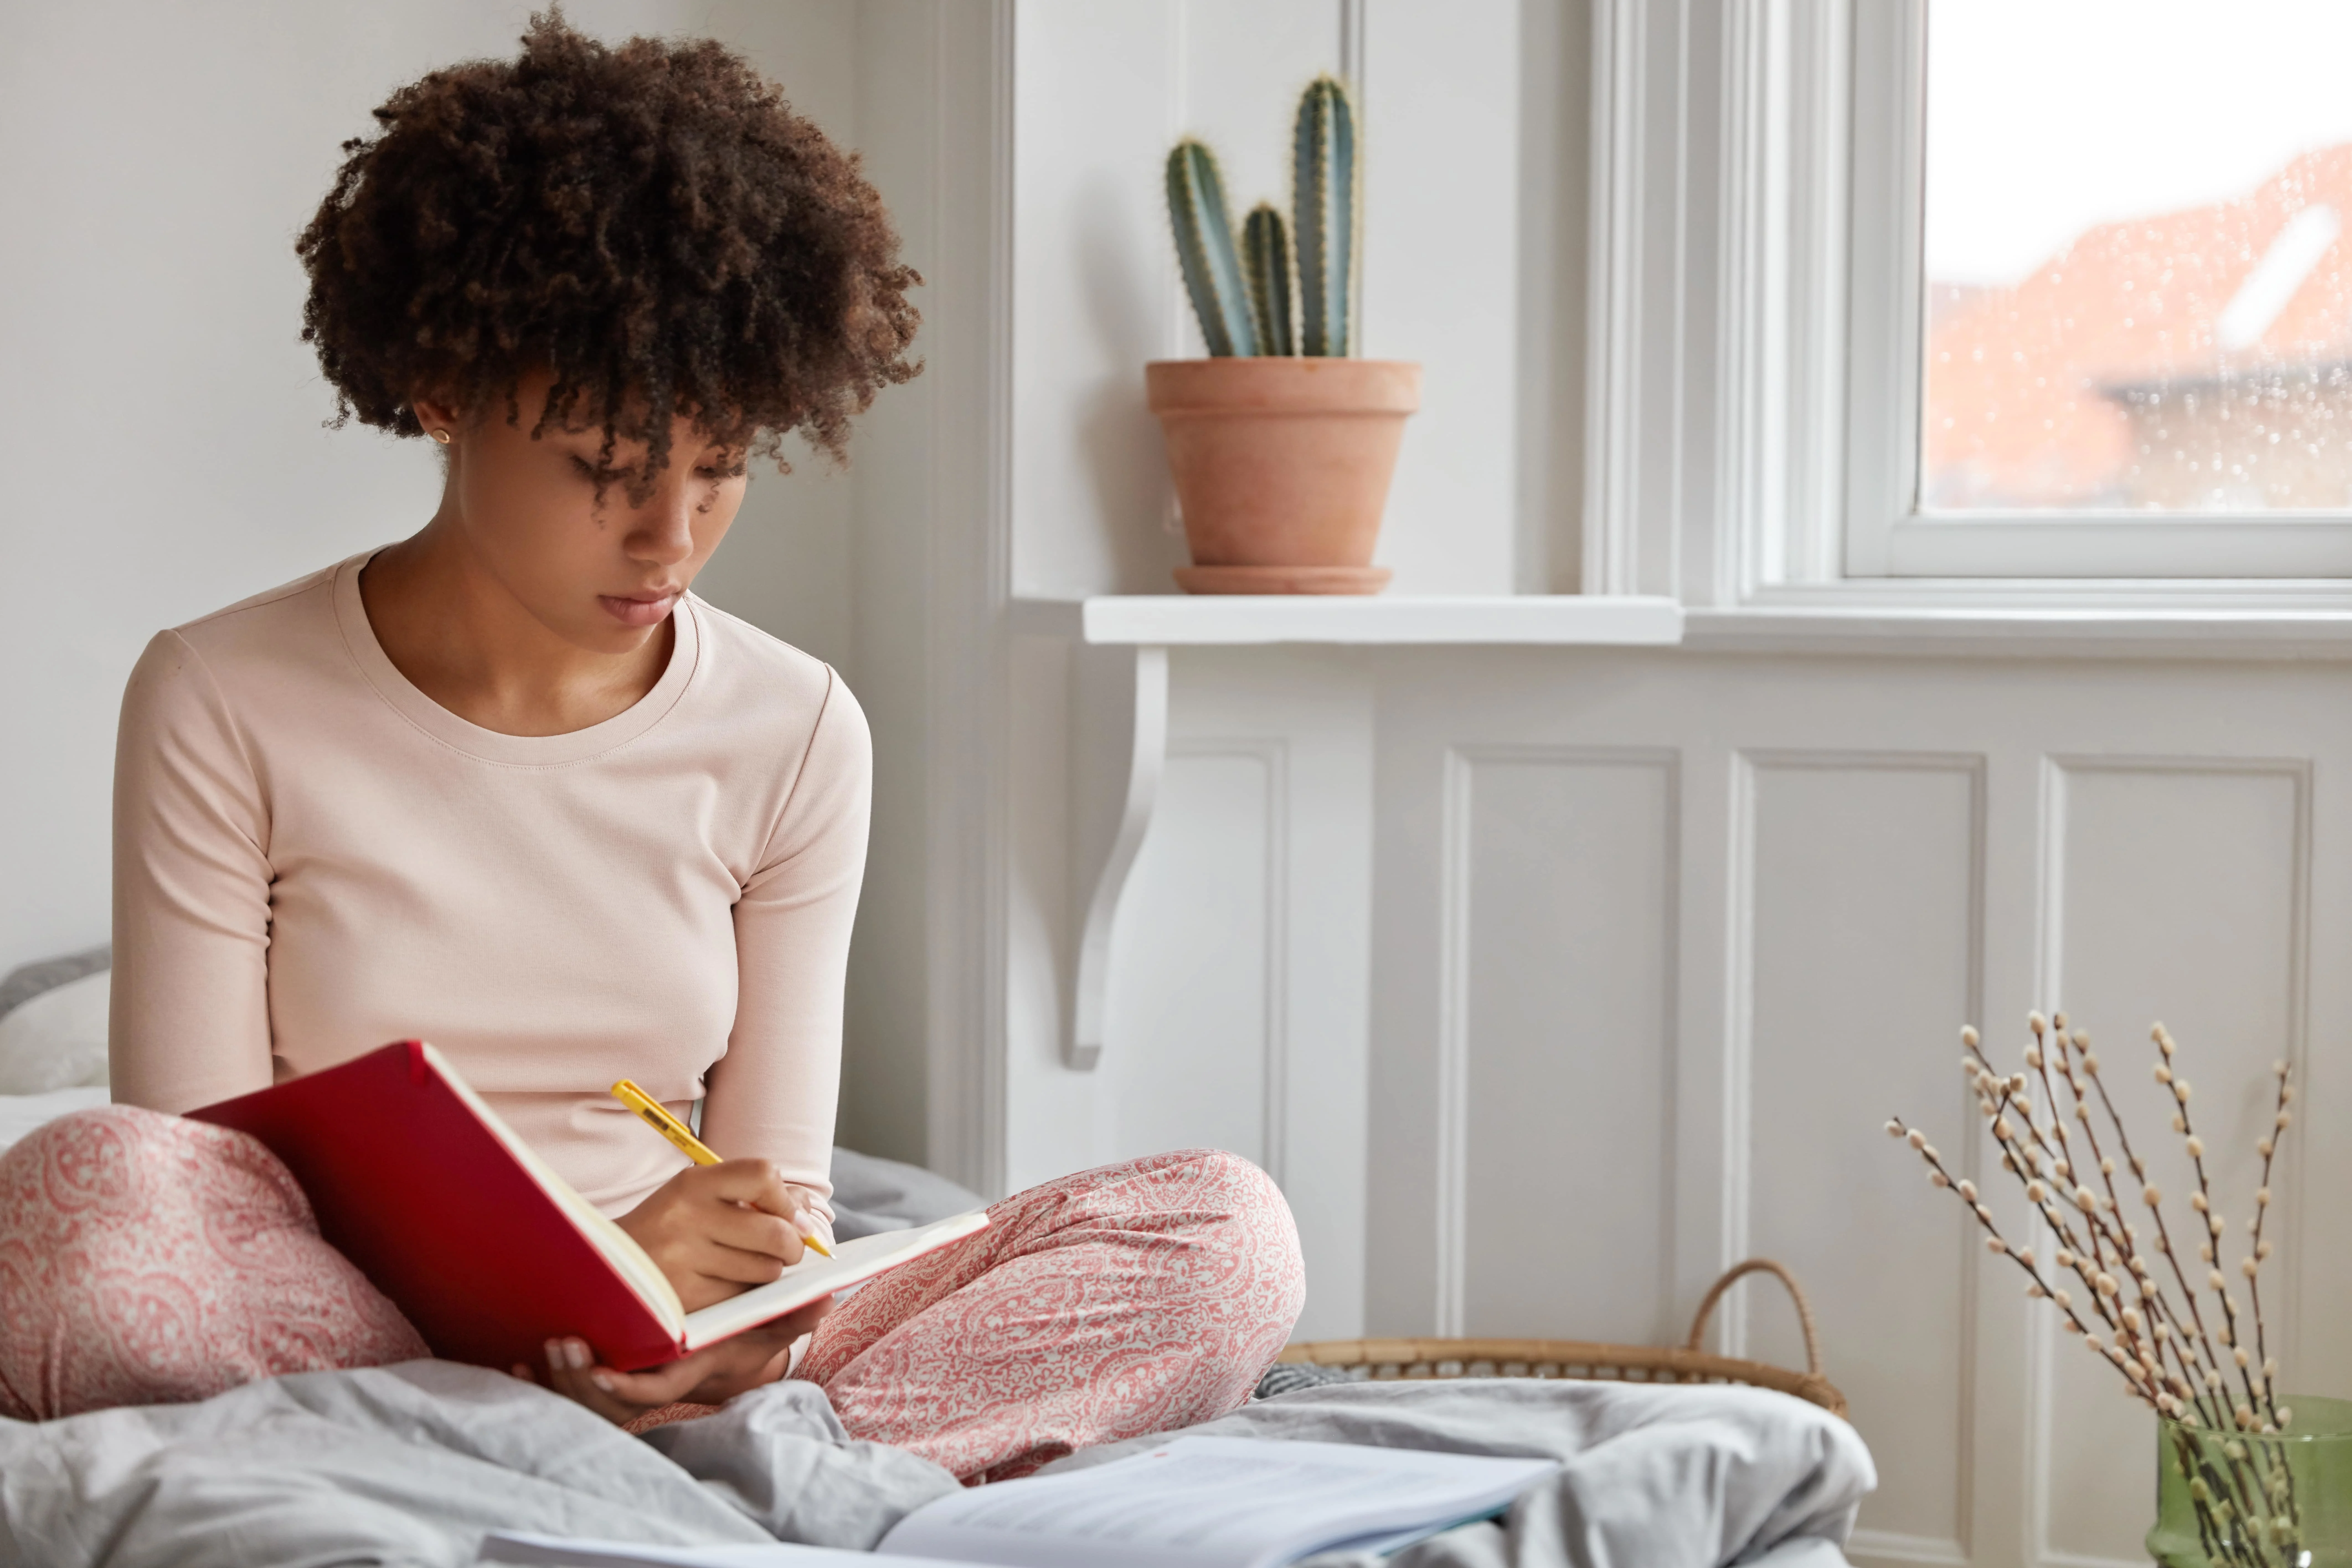 Girl writing in her notebook while sitting on a bed